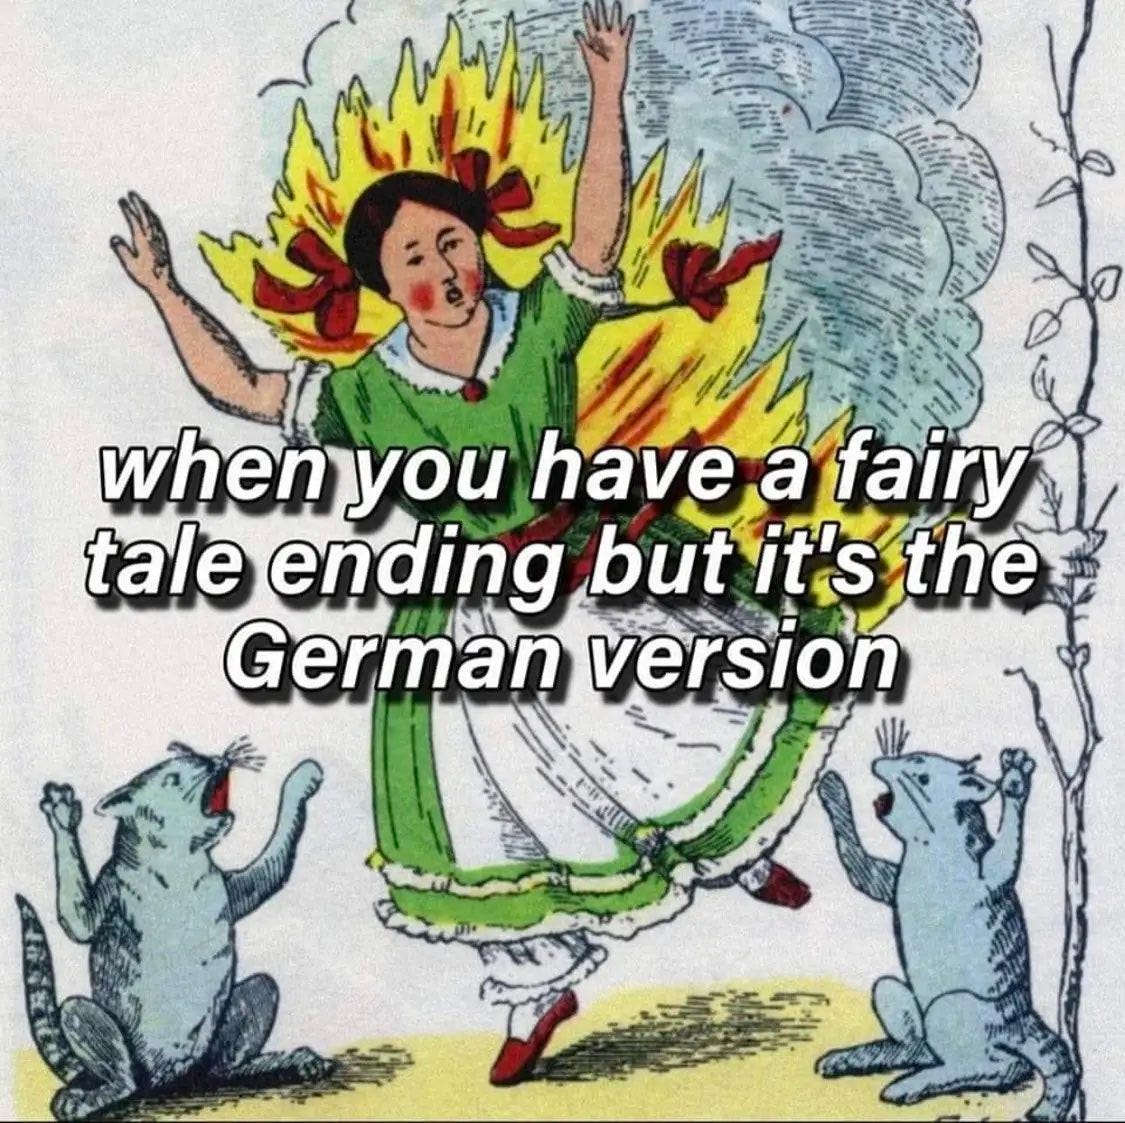 Colored drawing depicting a person in a green dress with ribbons in their hair. They are on fire and panicking. Two screaming/meowing cats stand on either side of the burning person, calling out.

Meme text: When you have a fairy tale ending but it's the German version